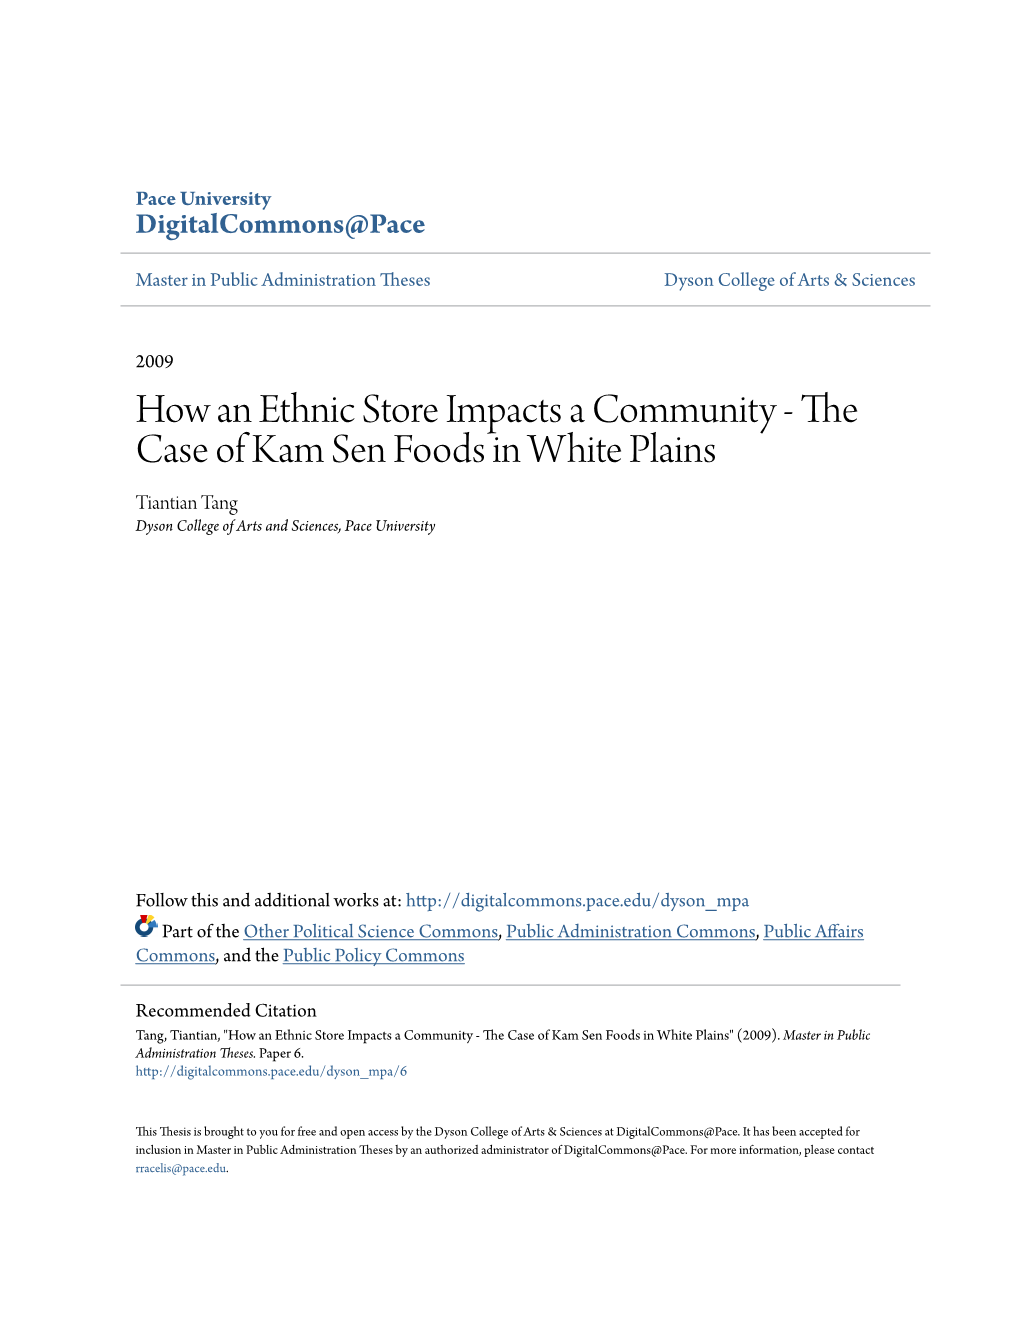 How an Ethnic Store Impacts a Community - the Case of Kam Sen Foods in White Plains Tiantian Tang Dyson College of Arts and Sciences, Pace University